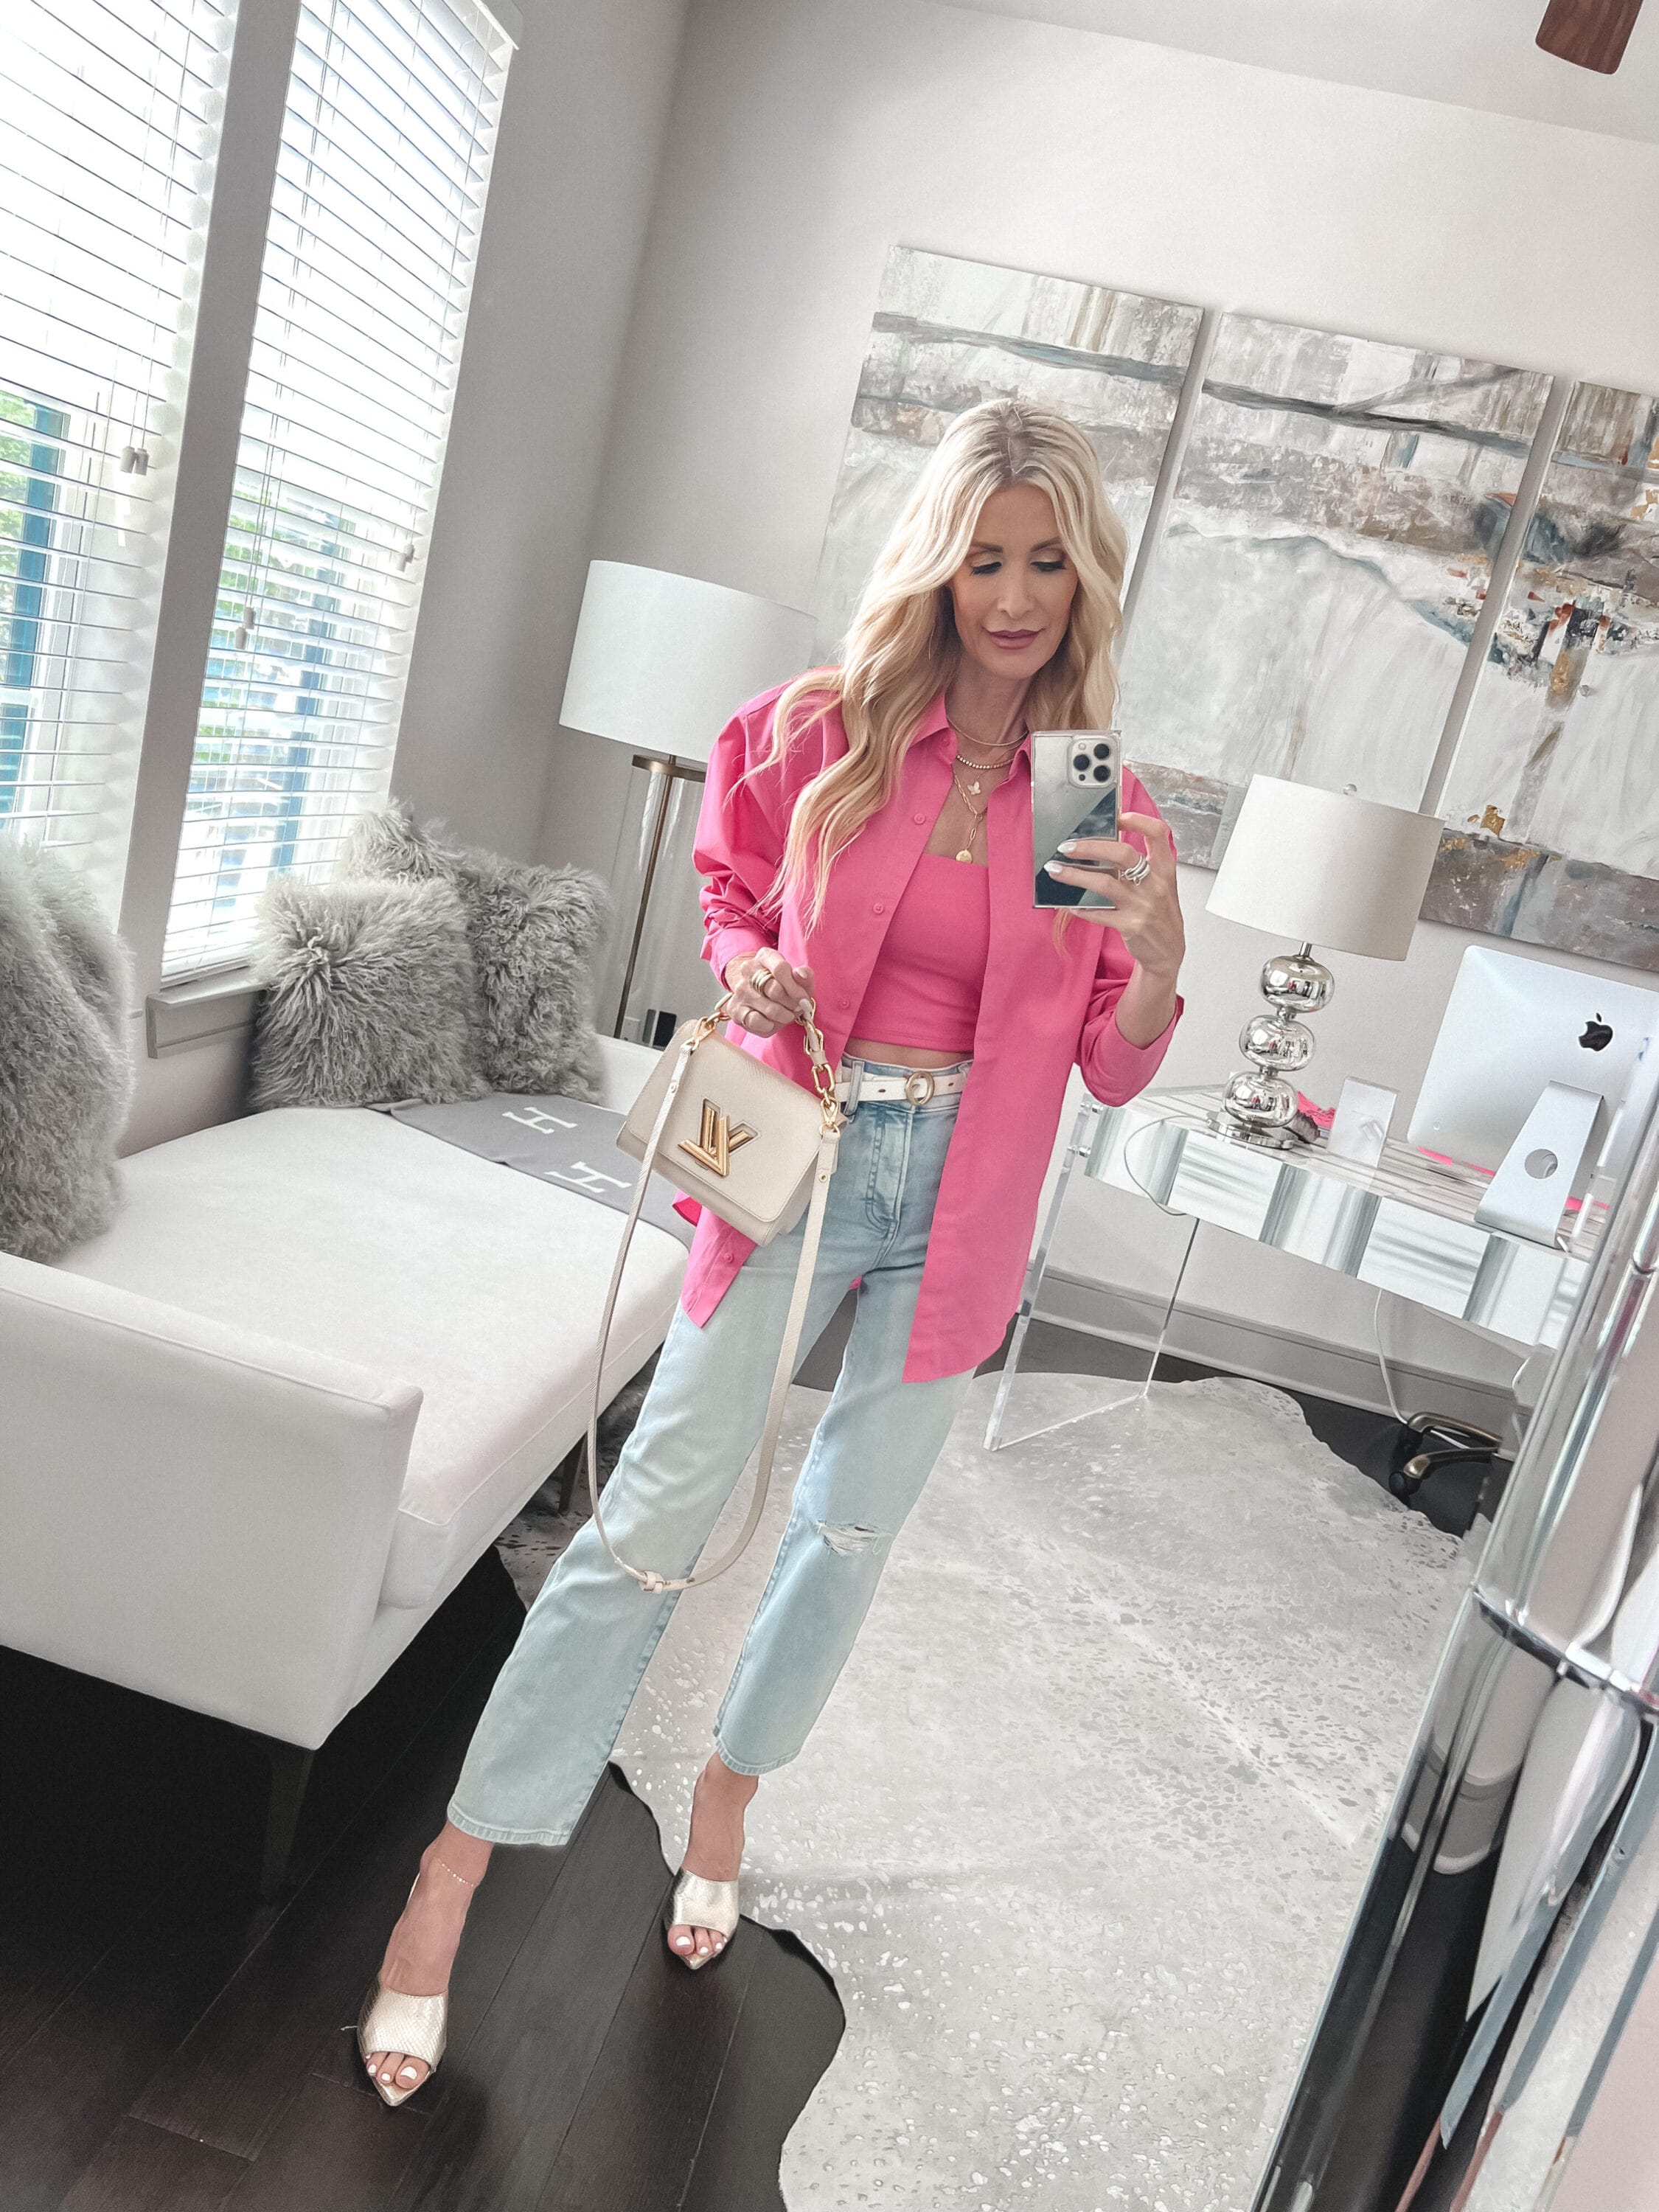 Dallas fashion stylist wears a pop of pink instead of all dark colors which is one of 5 common fashion mistakes for women over 40.